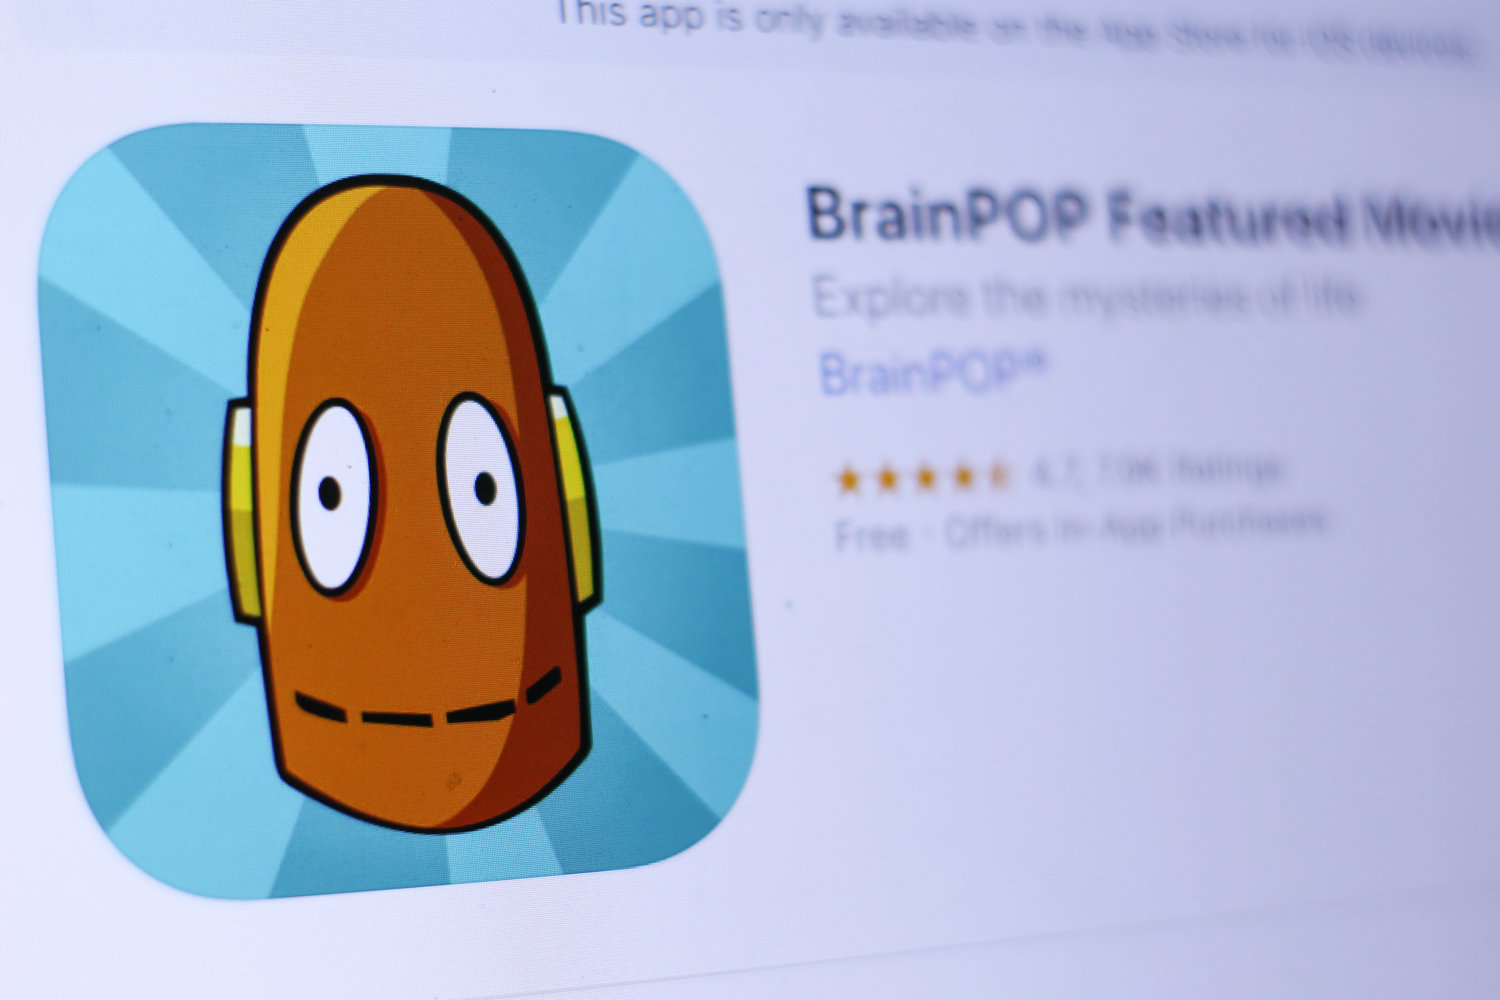 Moby, a robot character that's part of the BrainPOP cast